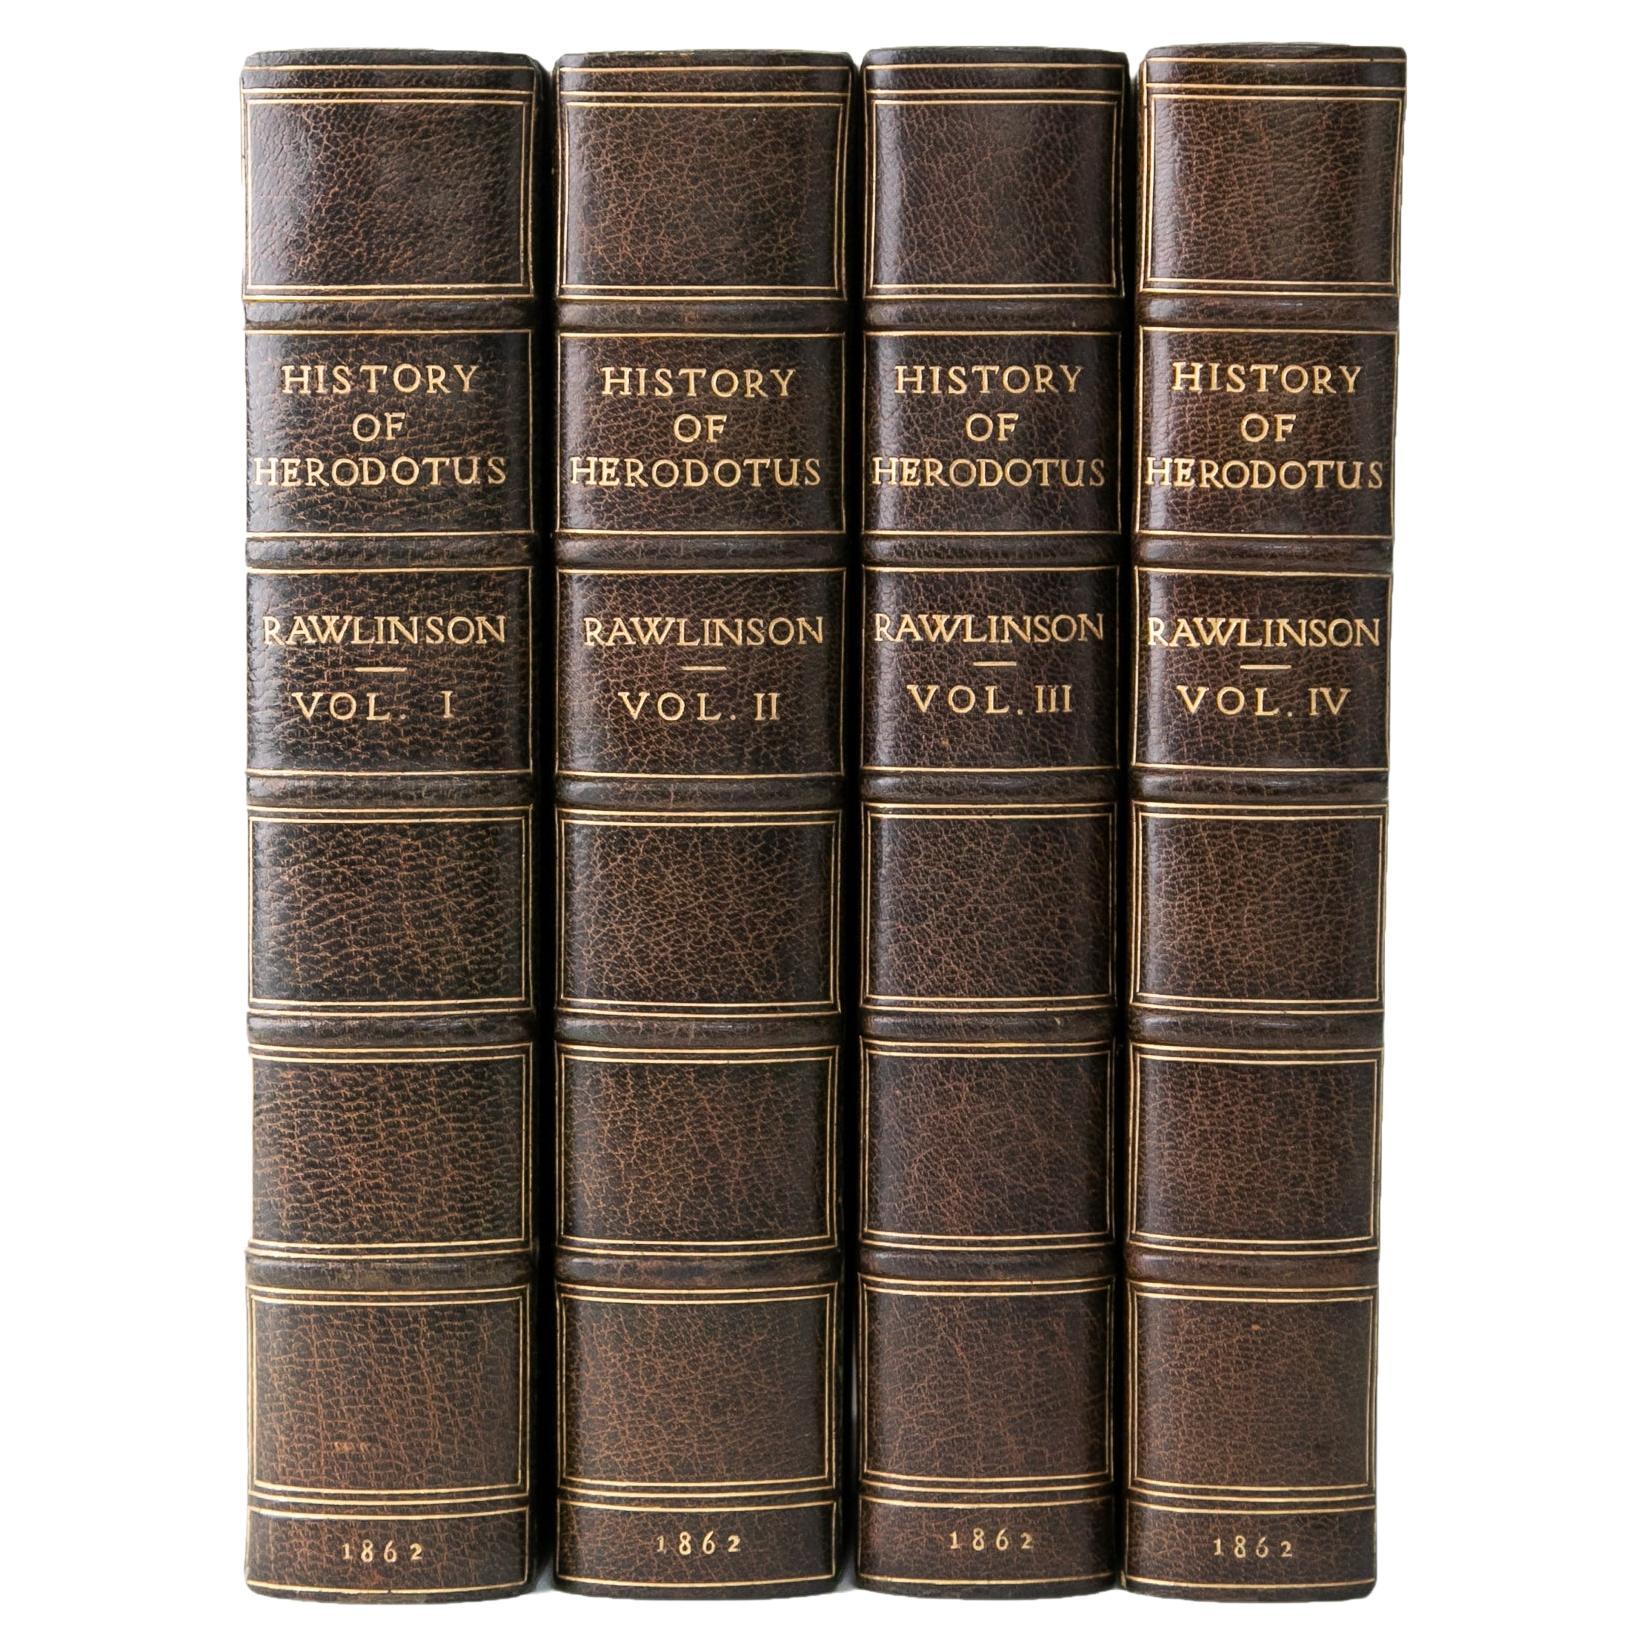 4 Volumes, George Rawlinson, History of Herodotus For Sale